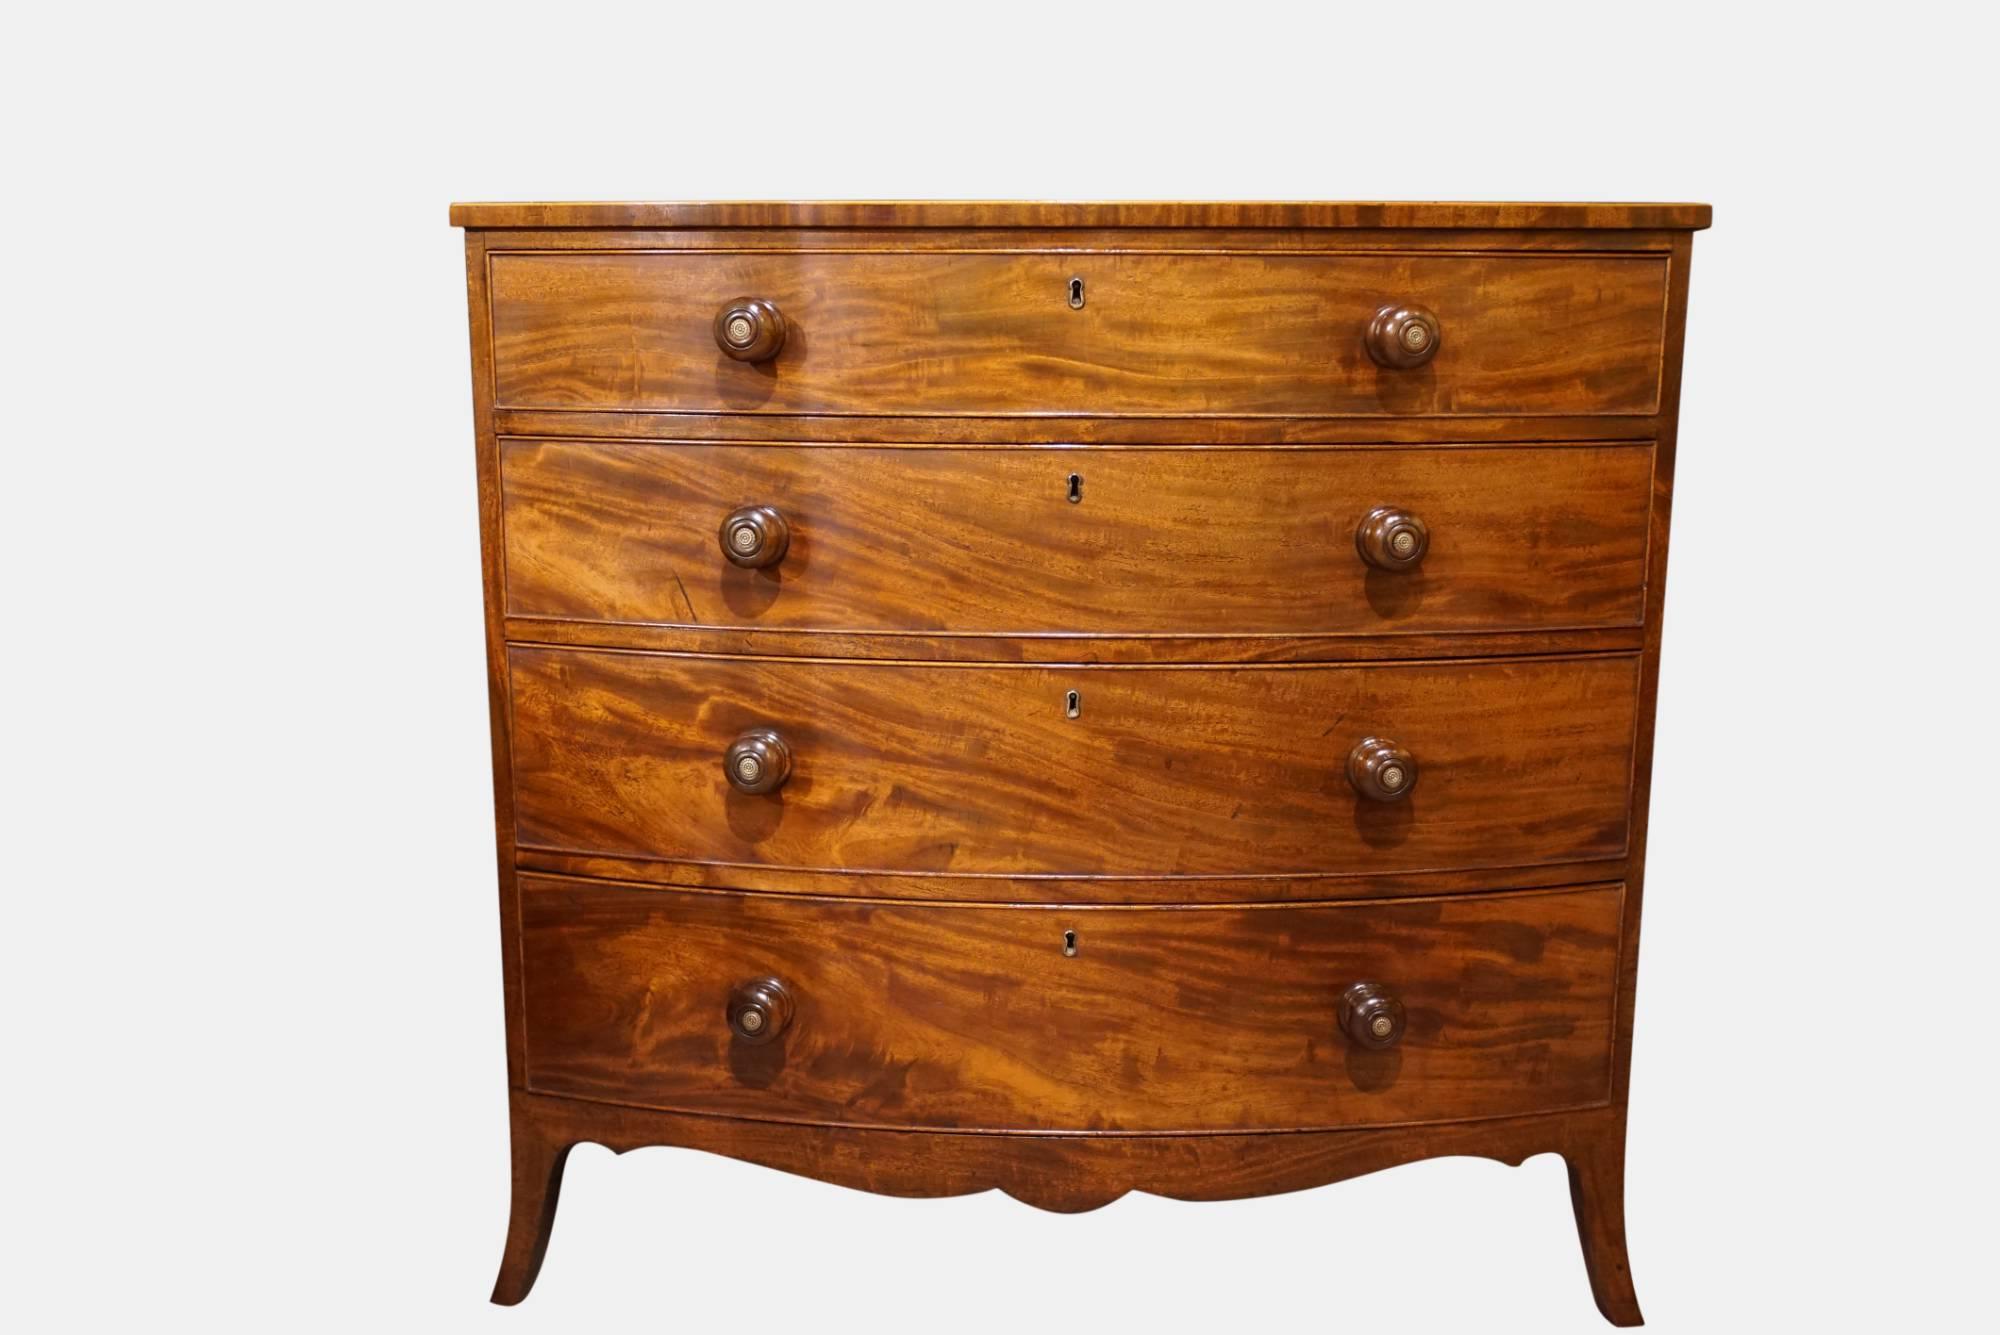 A Regency mahogany chest of four Graduated drawers of fine figure and colour raised on elegant splay feet, original knot handles,

circa 1810.